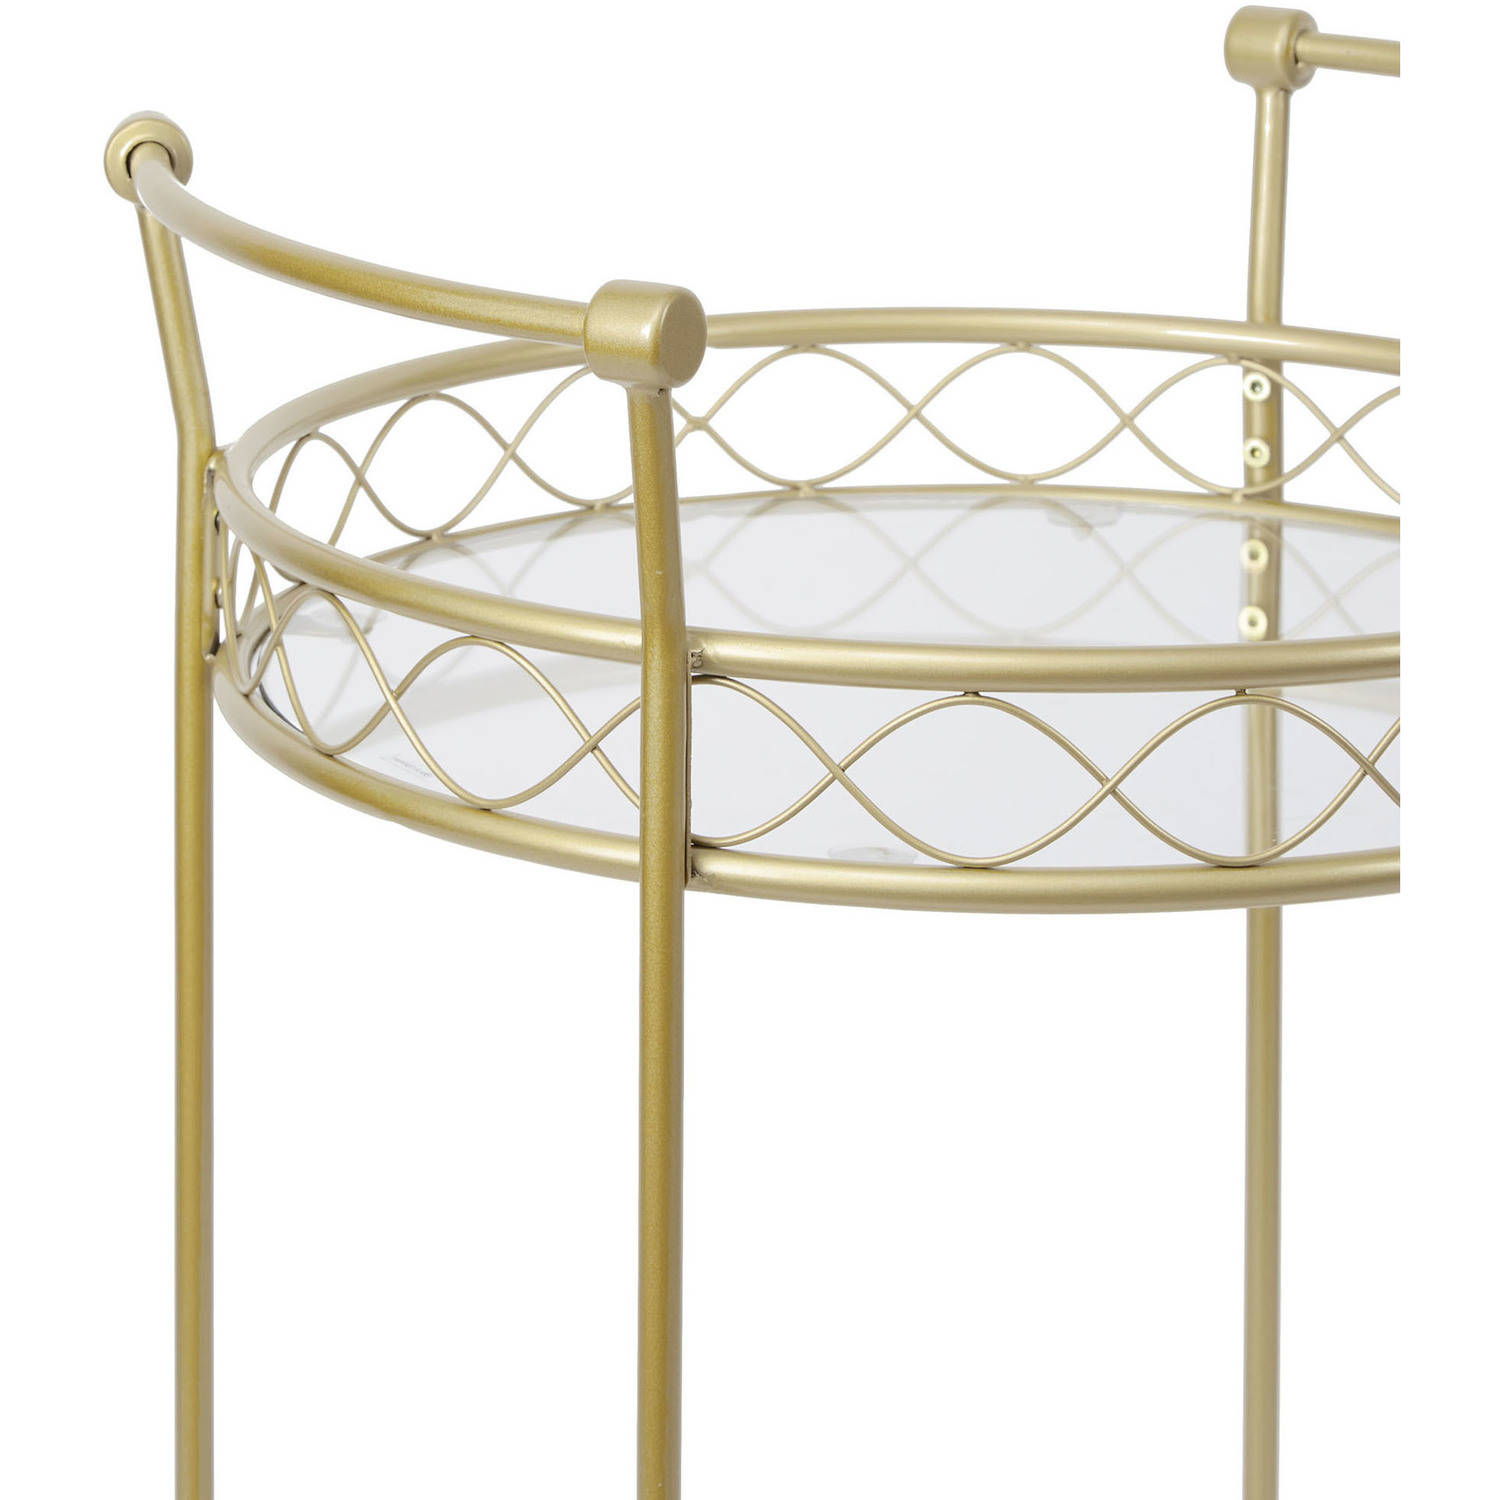 Better Homes & Gardens Mirabella Gold Metal Serving Barcart with Glass Shelves - image 3 of 3